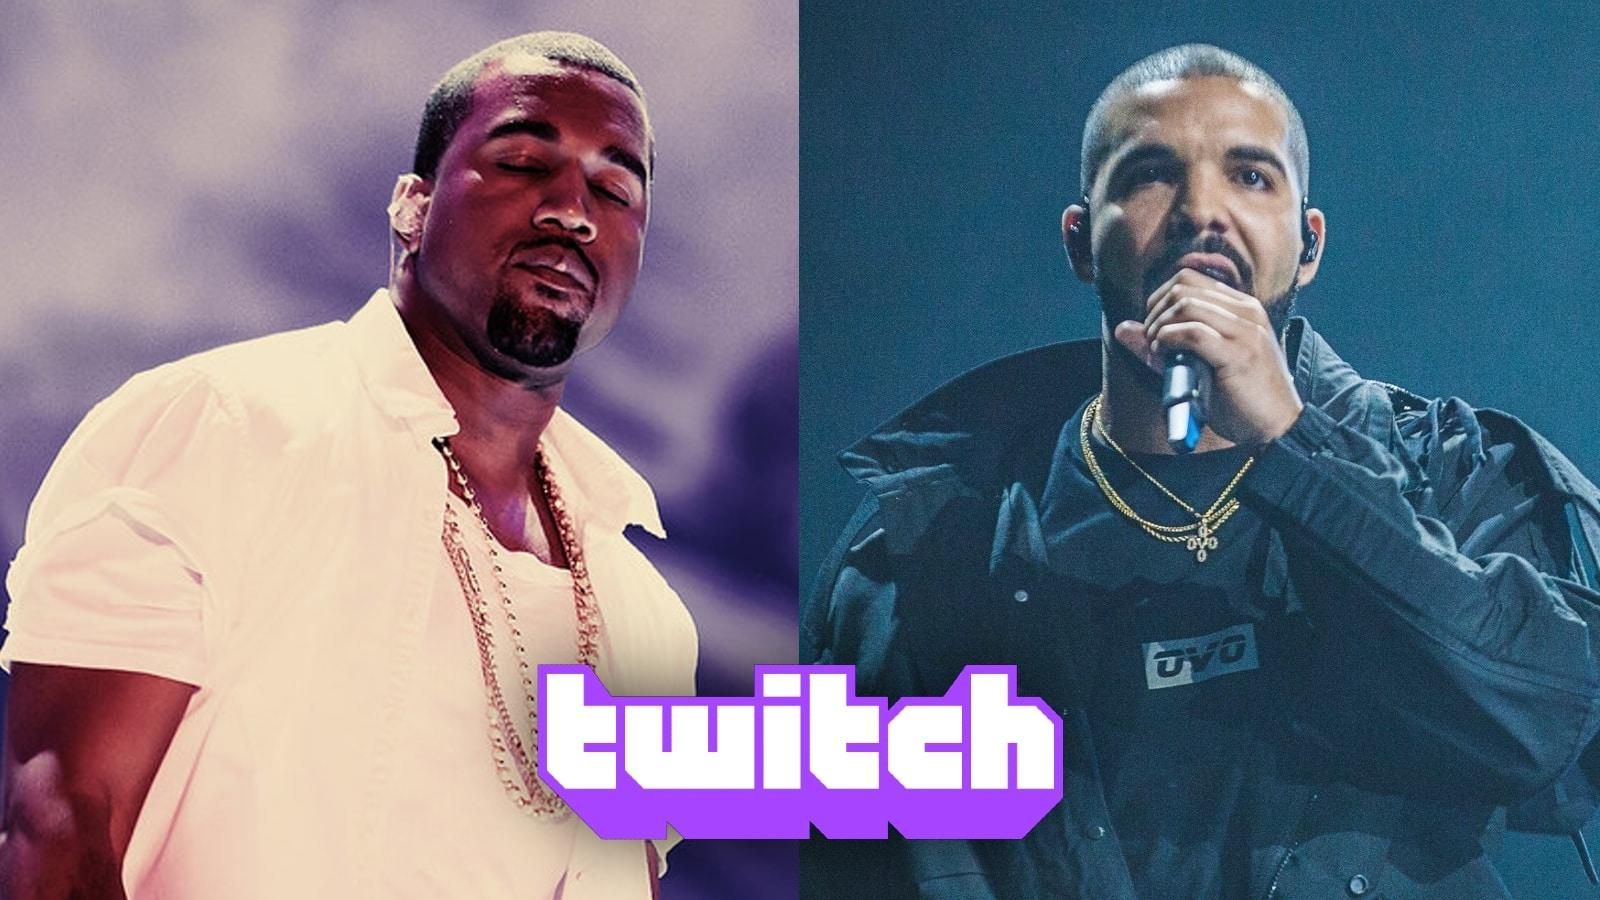 Kanye West and Drake in concert with Twitch logo